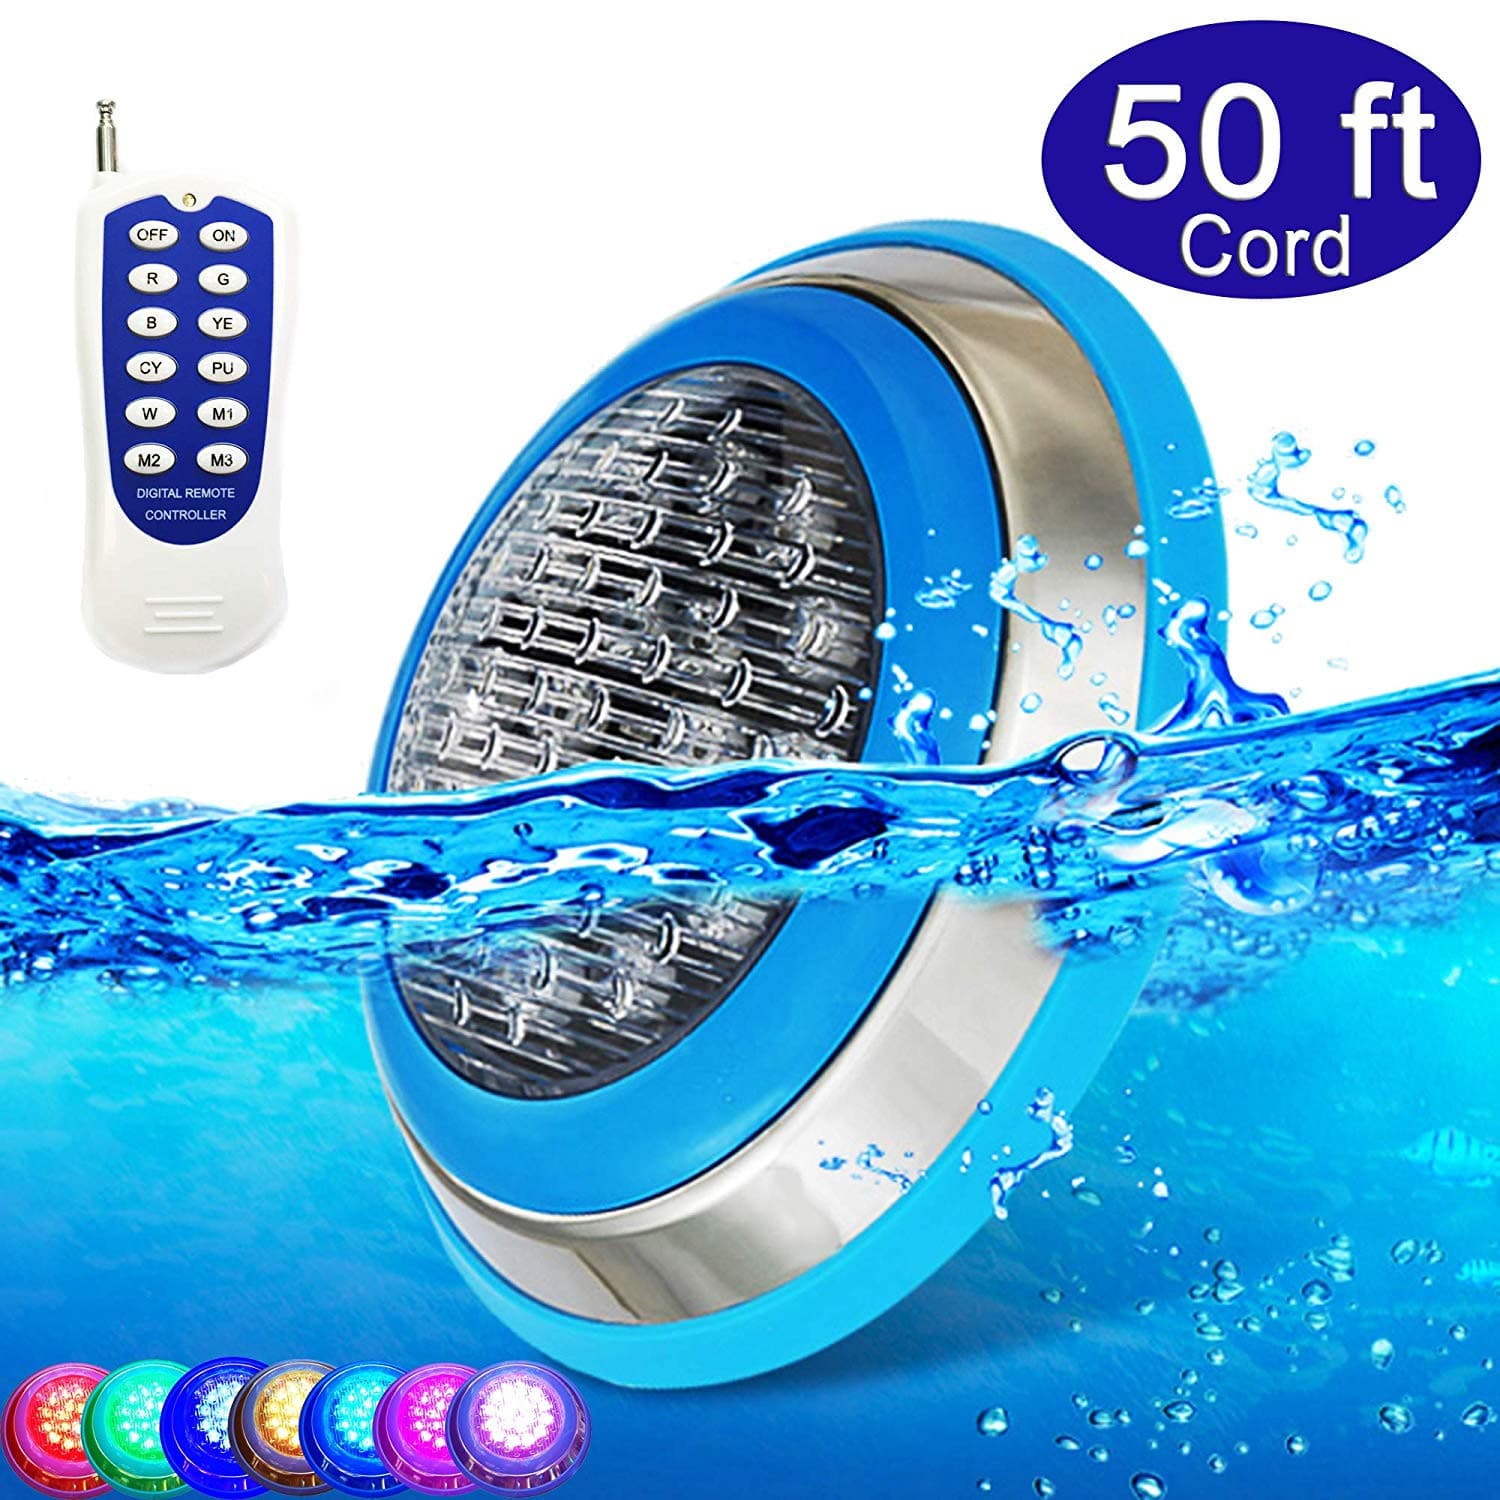 ABBA 12V 54W Stainless Steel RGB LED Pool & Spa Light - Sonic Electric